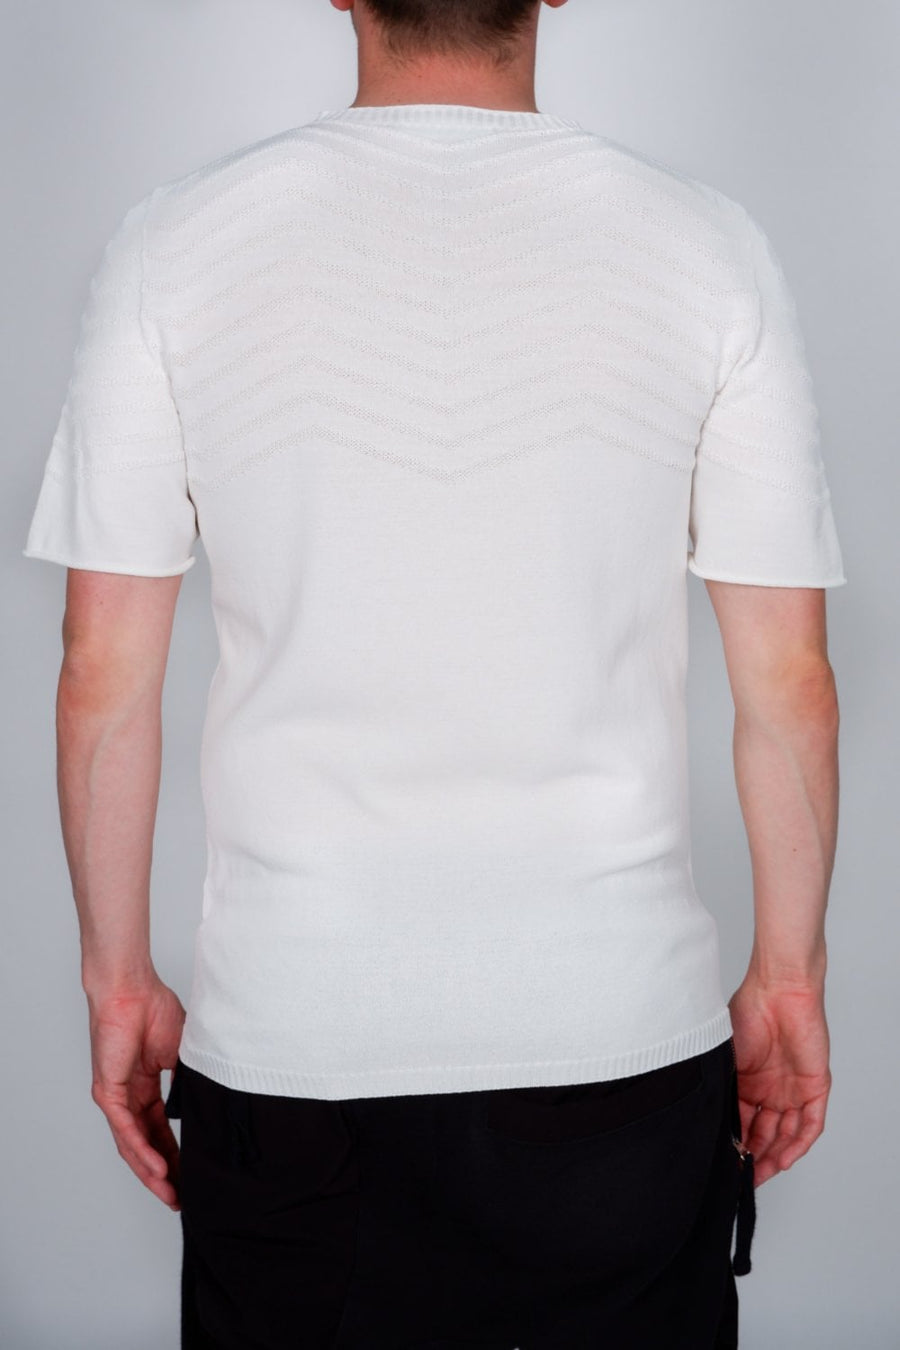 Buy the Daniele Fiesoli Chevron Design Knit T-Shirt White at Intro. Spend £100 for free next day UK delivery. Official stockists. We ship worldwide